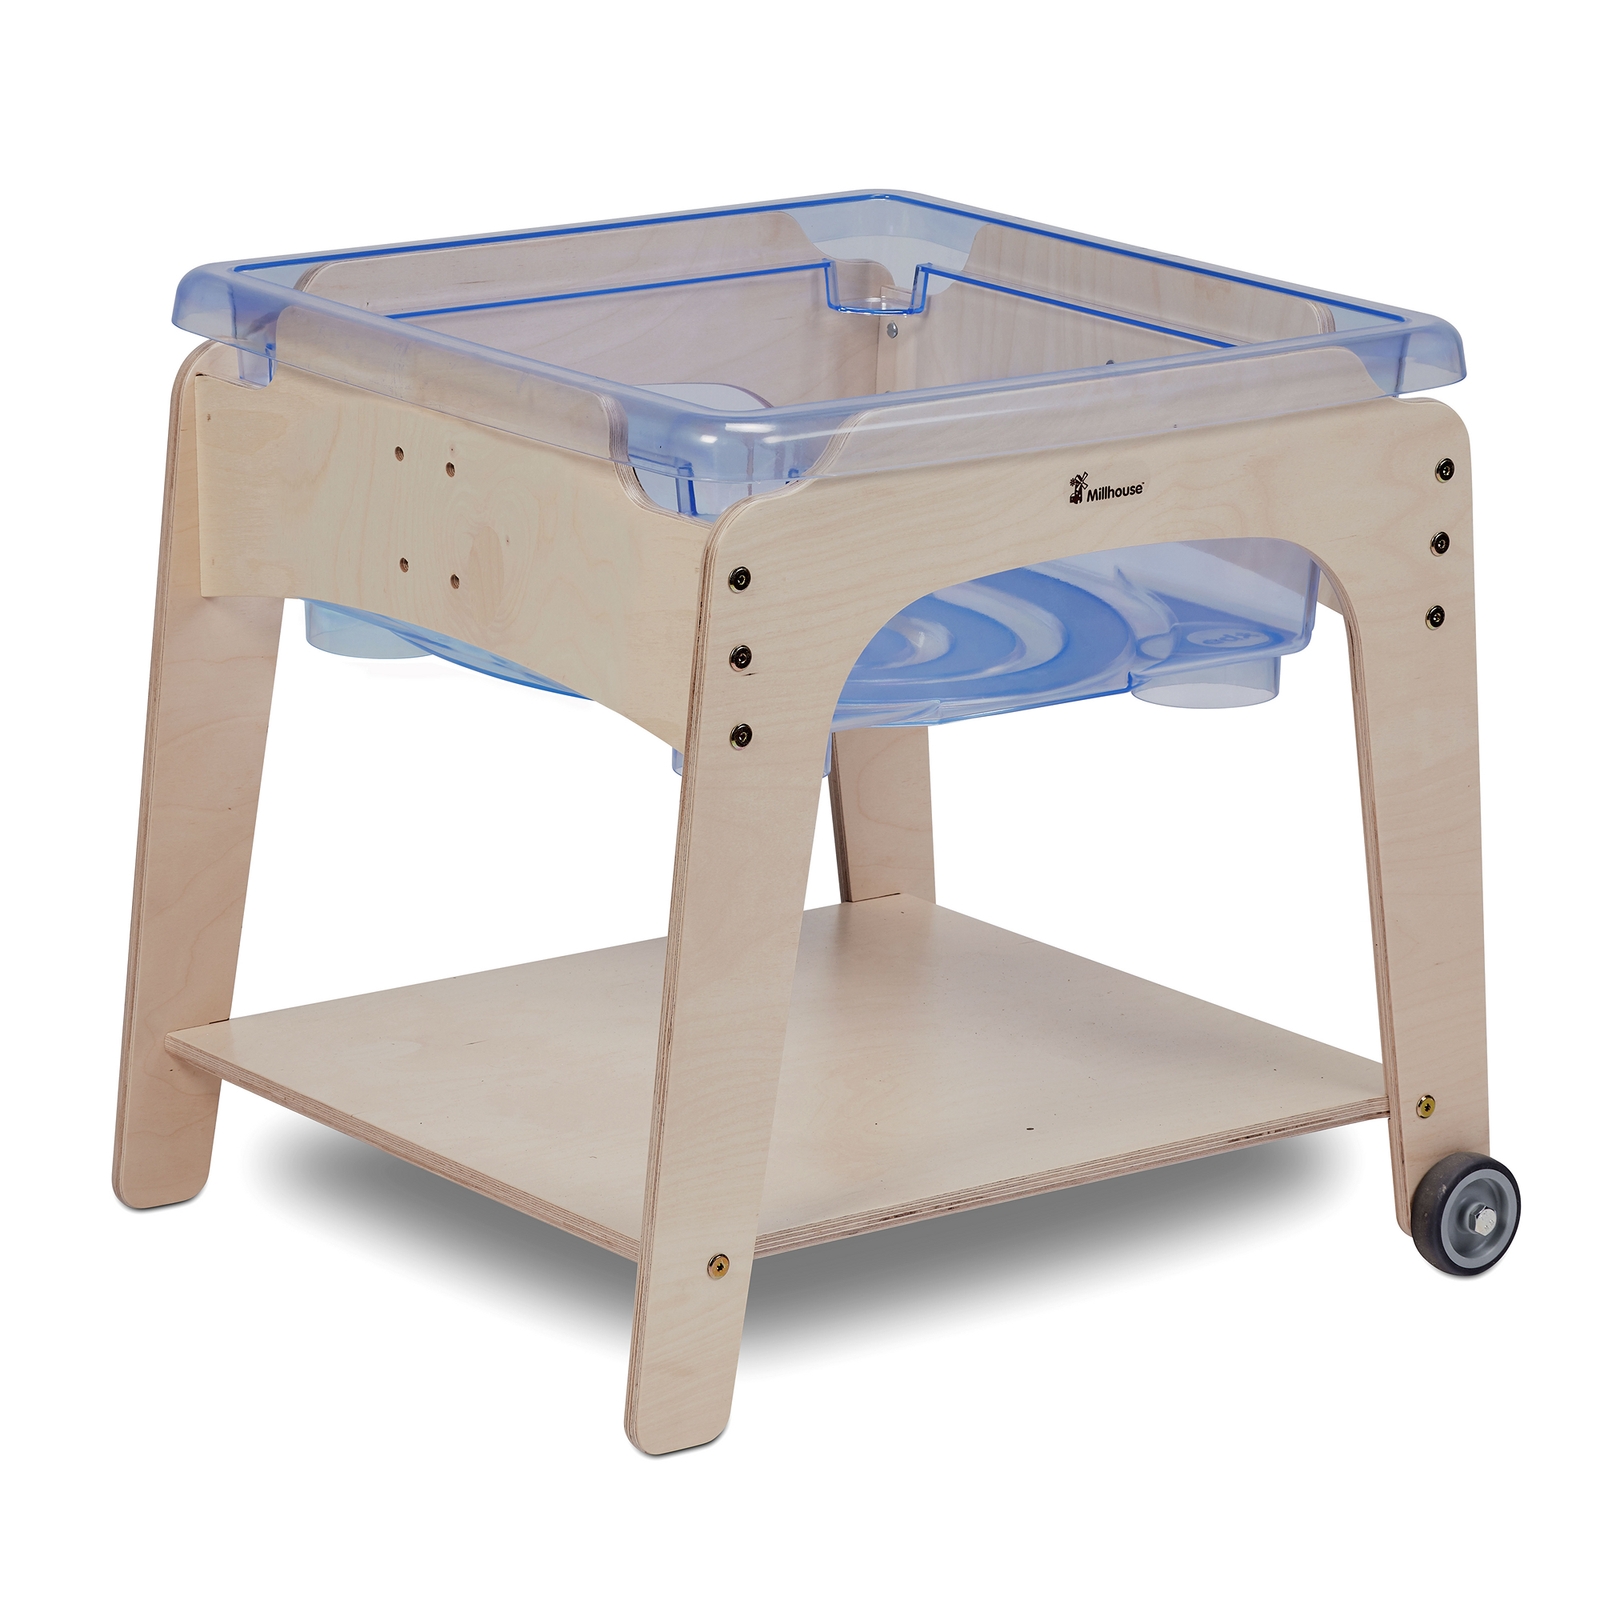 Millhouse Mini Sand and Water Station - 580 x 580 x 590mm - Each